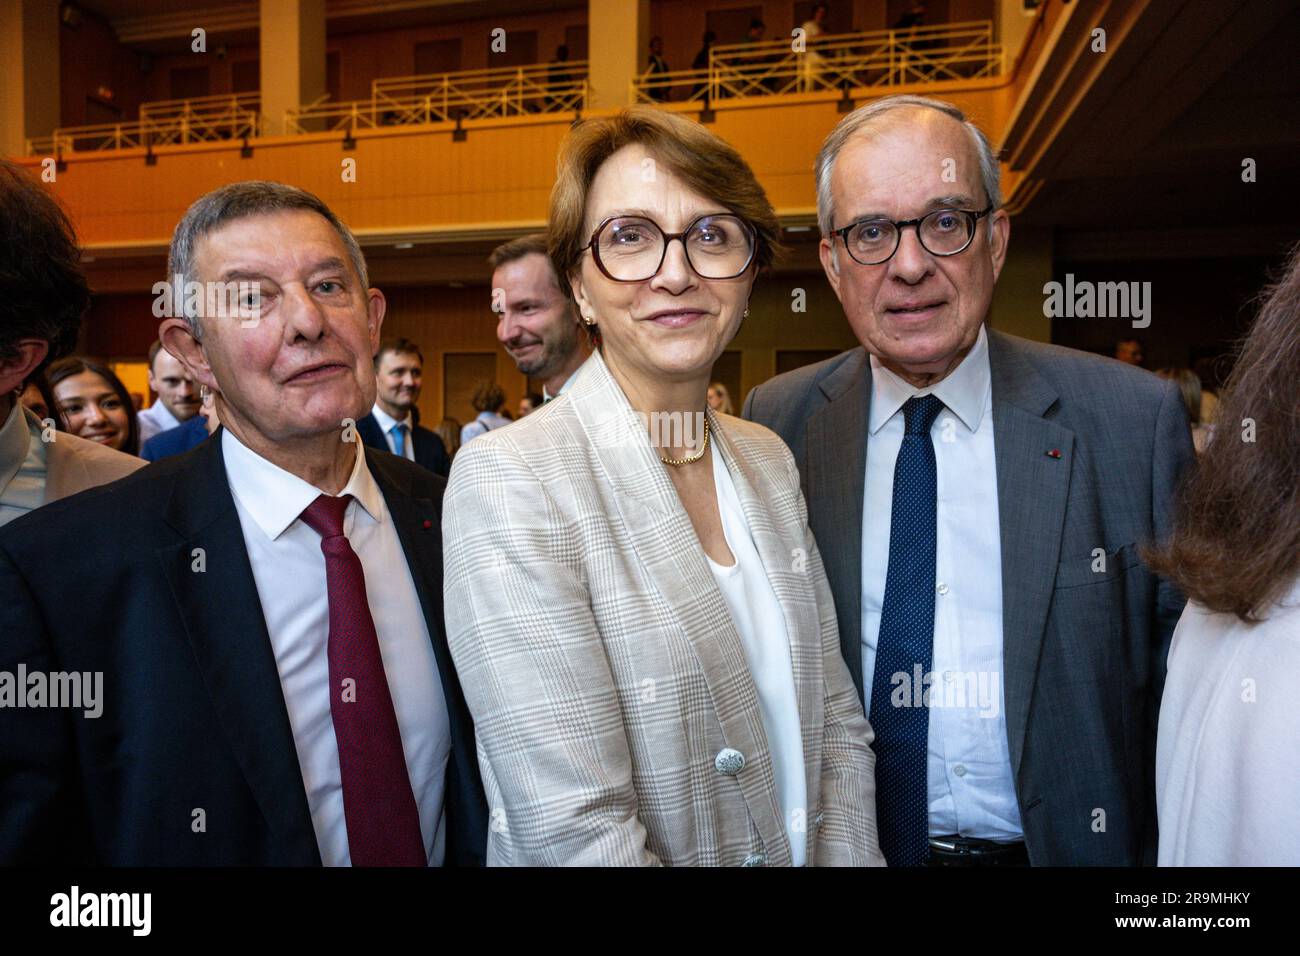 Paris, France. 27th June, 2023. Jean-Pierre Jouyet, a guest and French diplomat Maurice Gourdault-Montagne attends honorary doctorate ceremony at Sciences Po or Political Sciences Institute in Paris, France, on June 27, 2023. Photo by Ammar Abd Rabbo/ABACAPRESS.COM Credit: Abaca Press/Alamy Live News Stock Photo